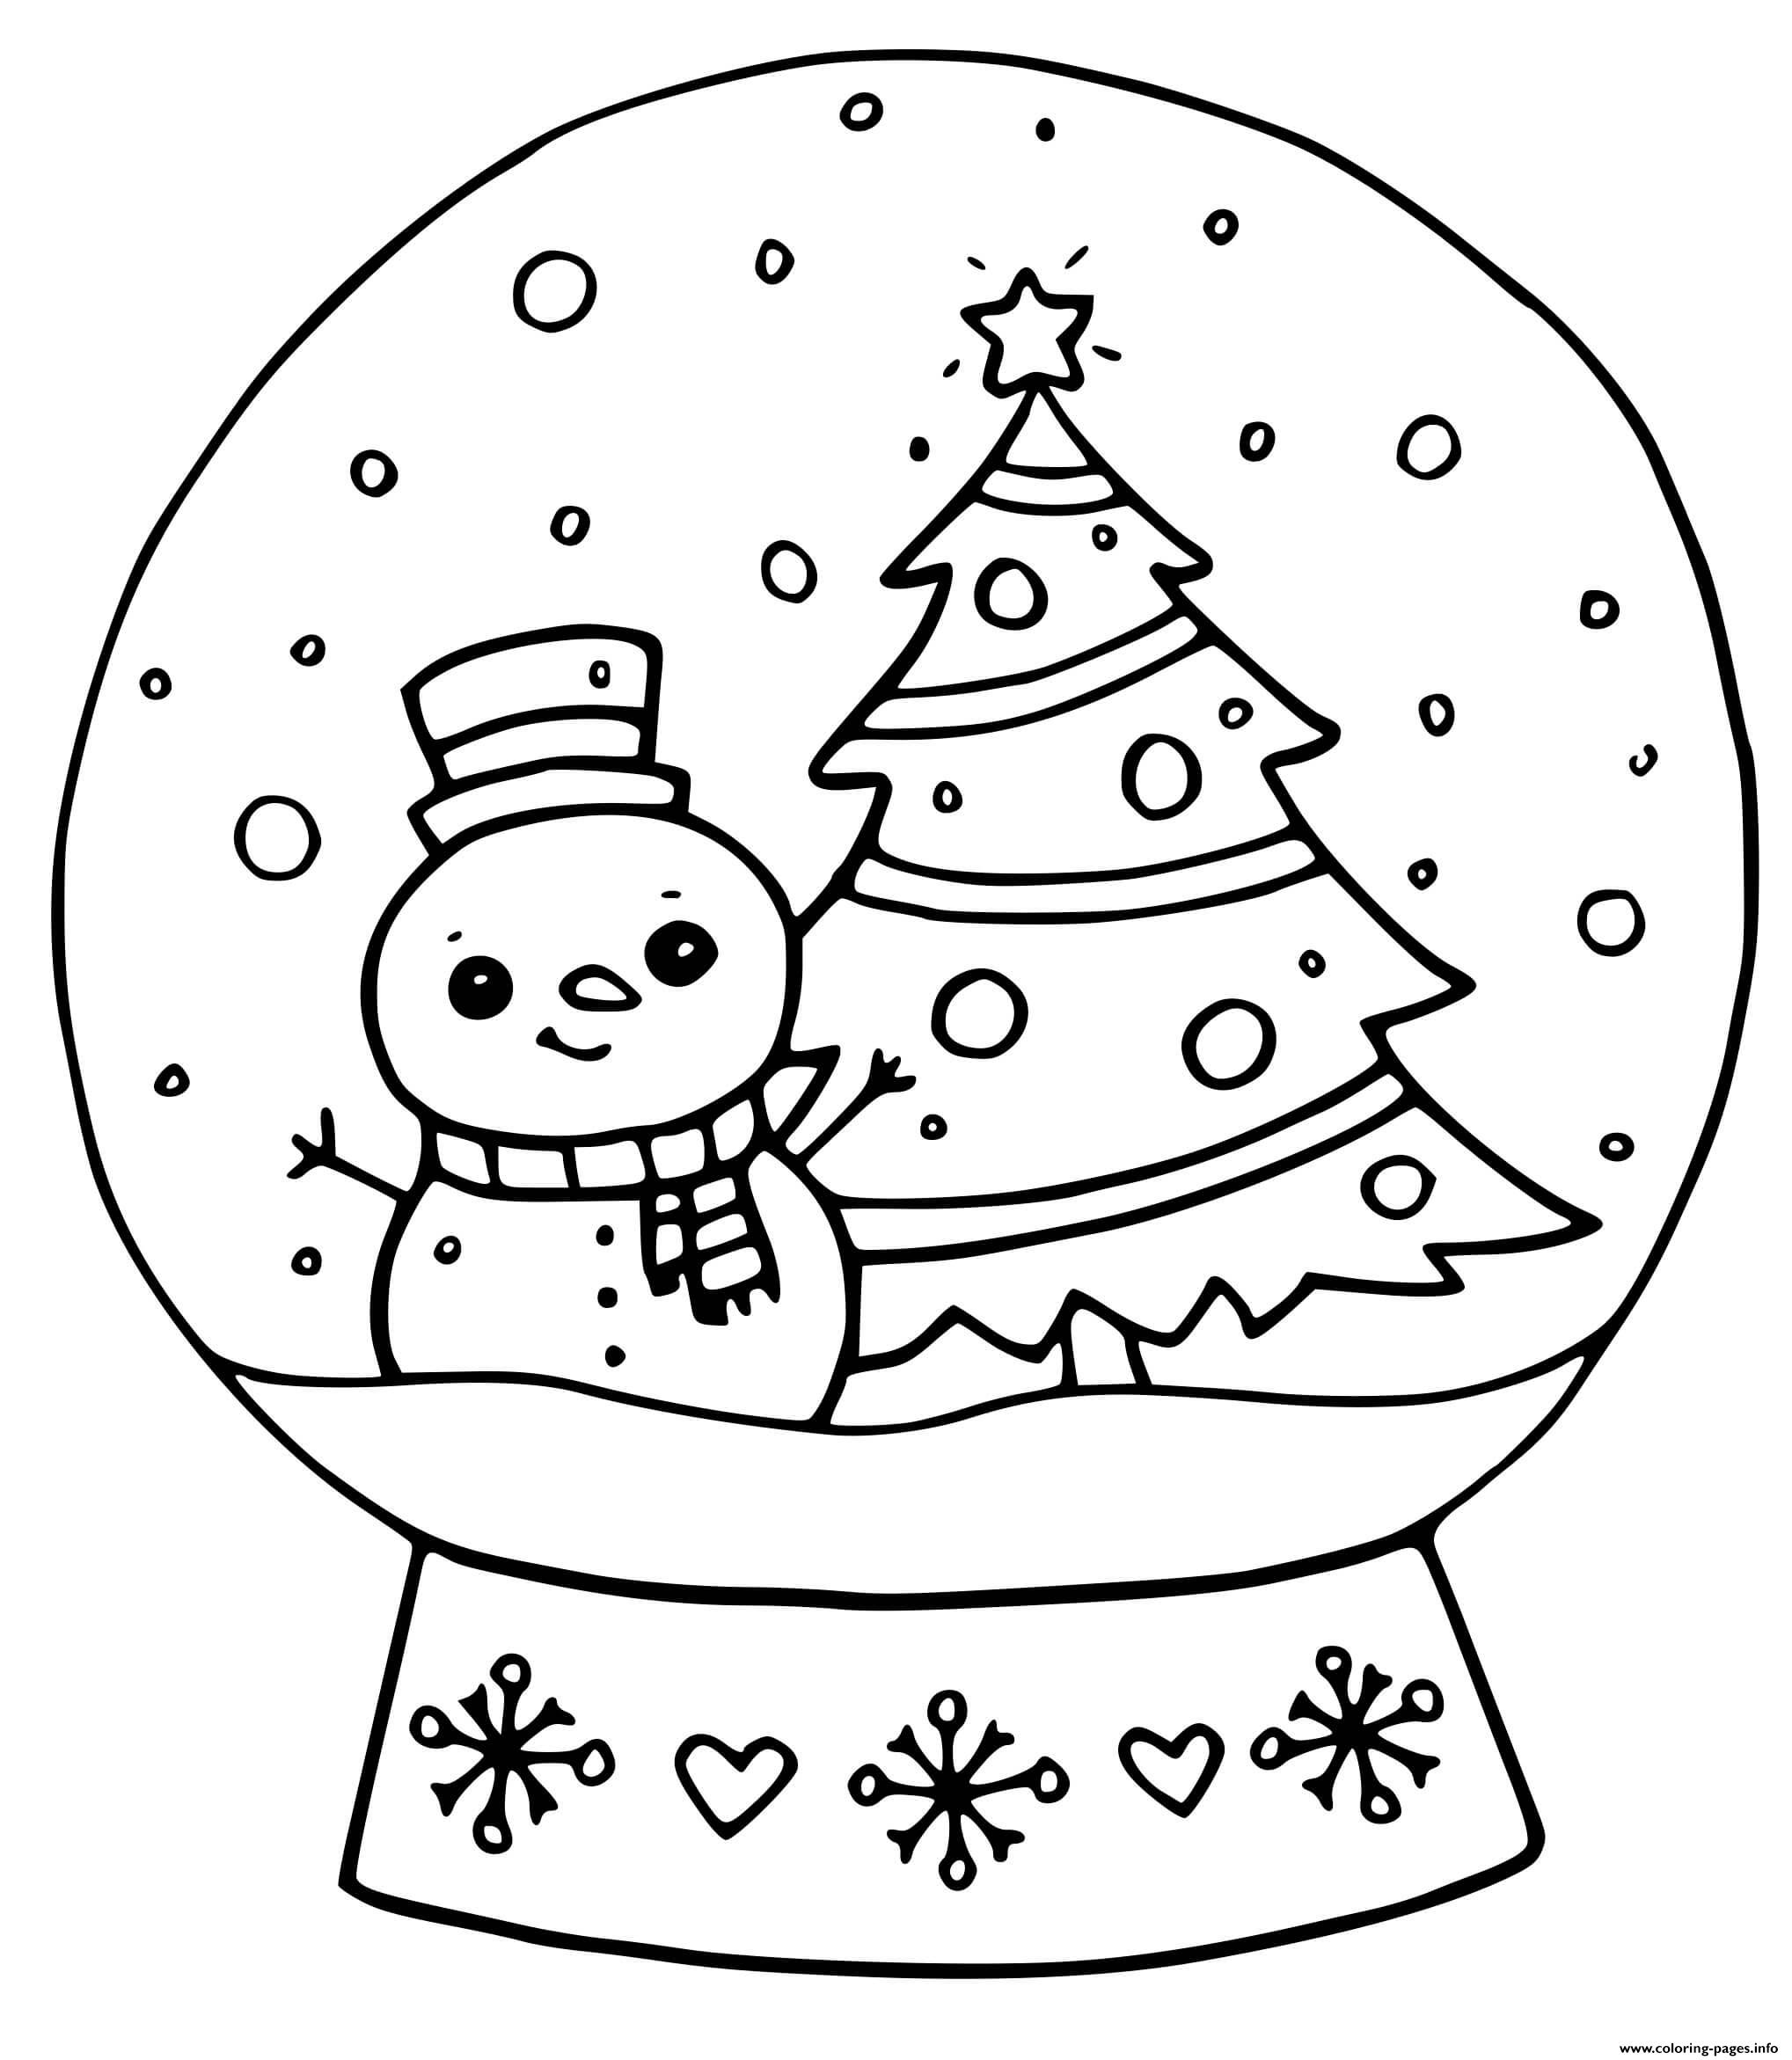 Christmas Snow Glove Cute coloring